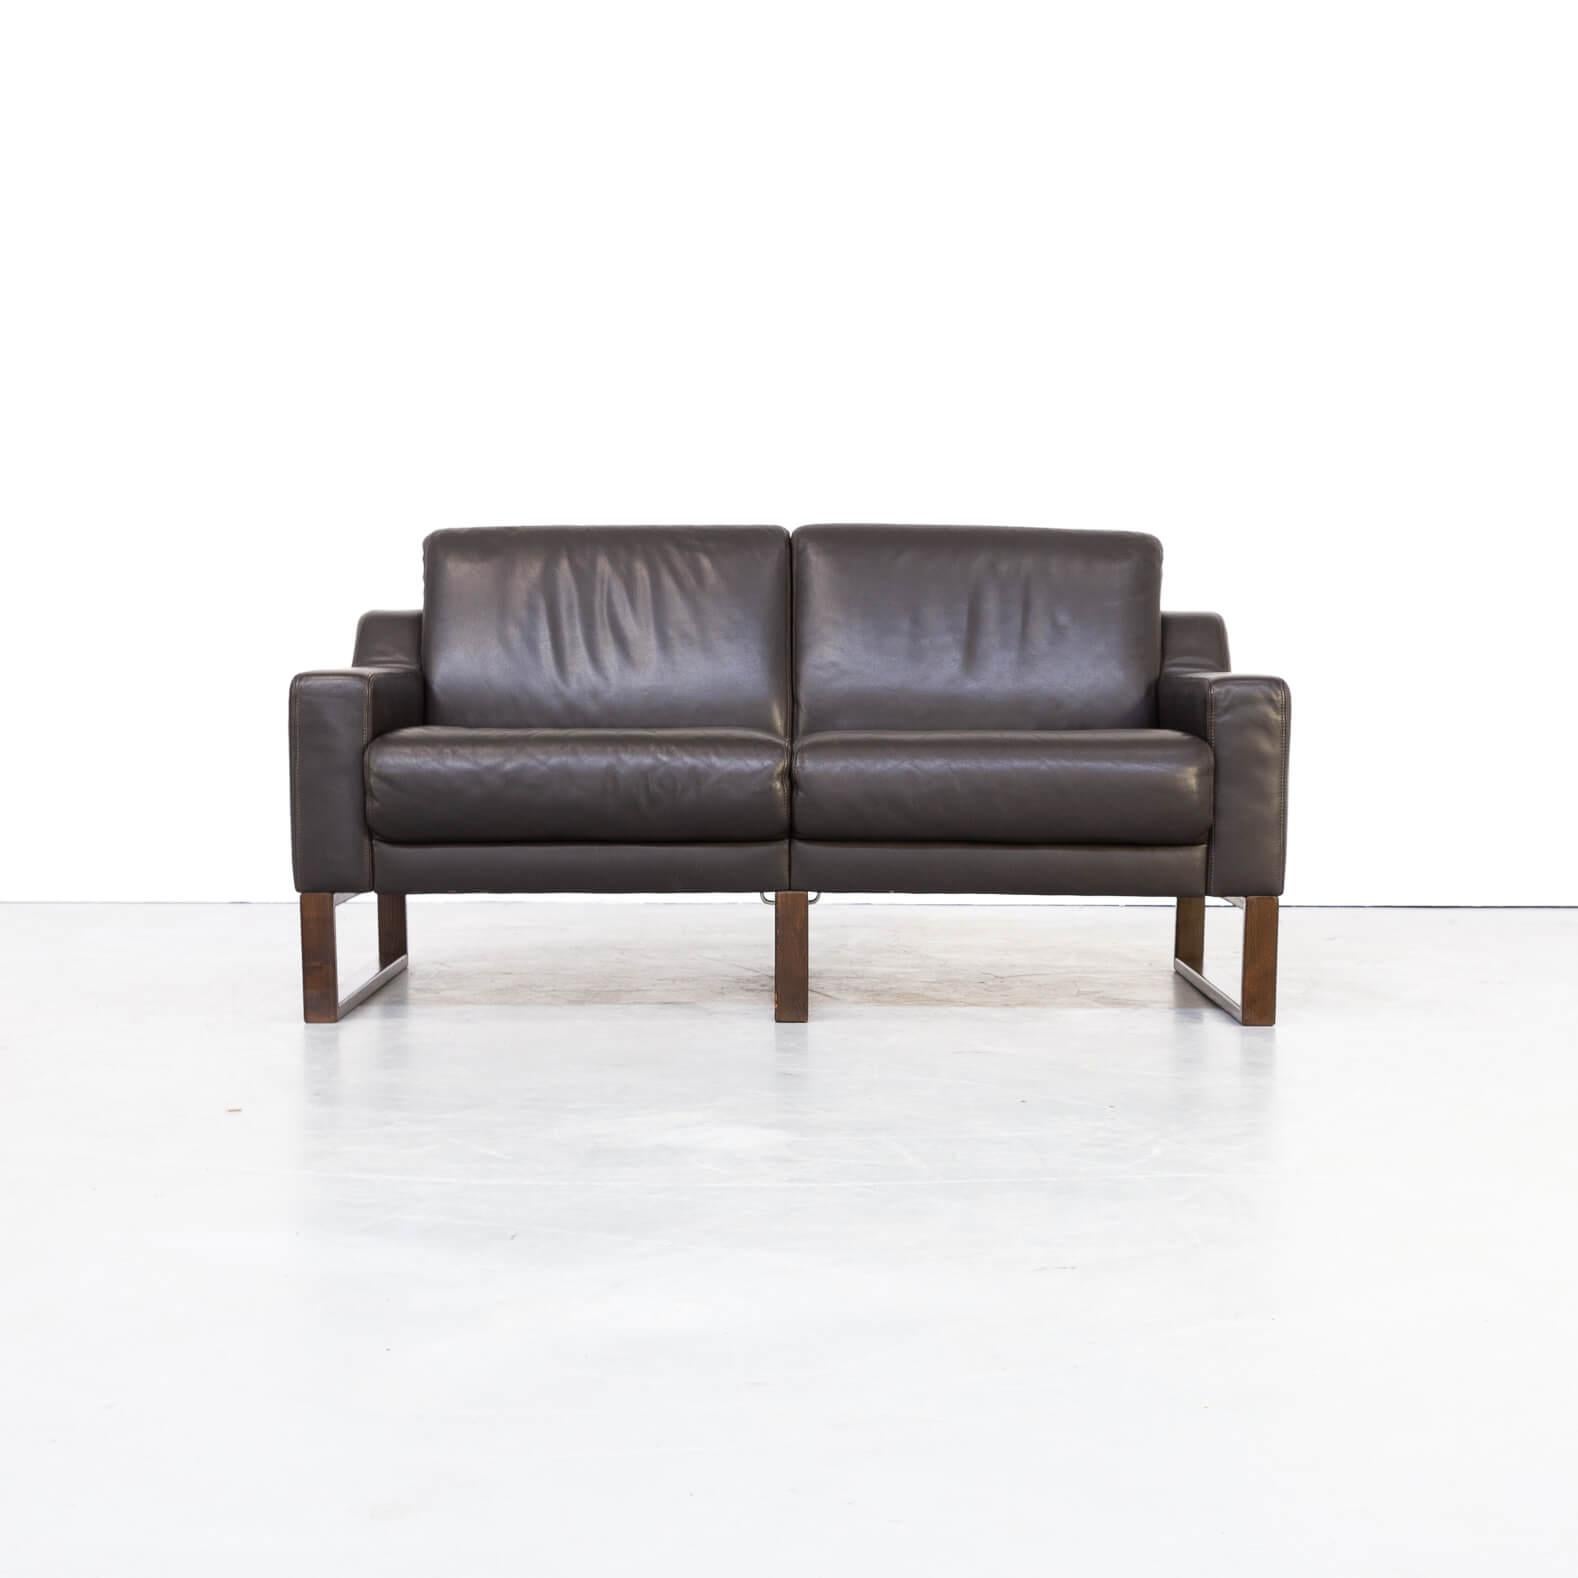 20th Century 90s Brown Leather Two-Seat Sofa For Sale